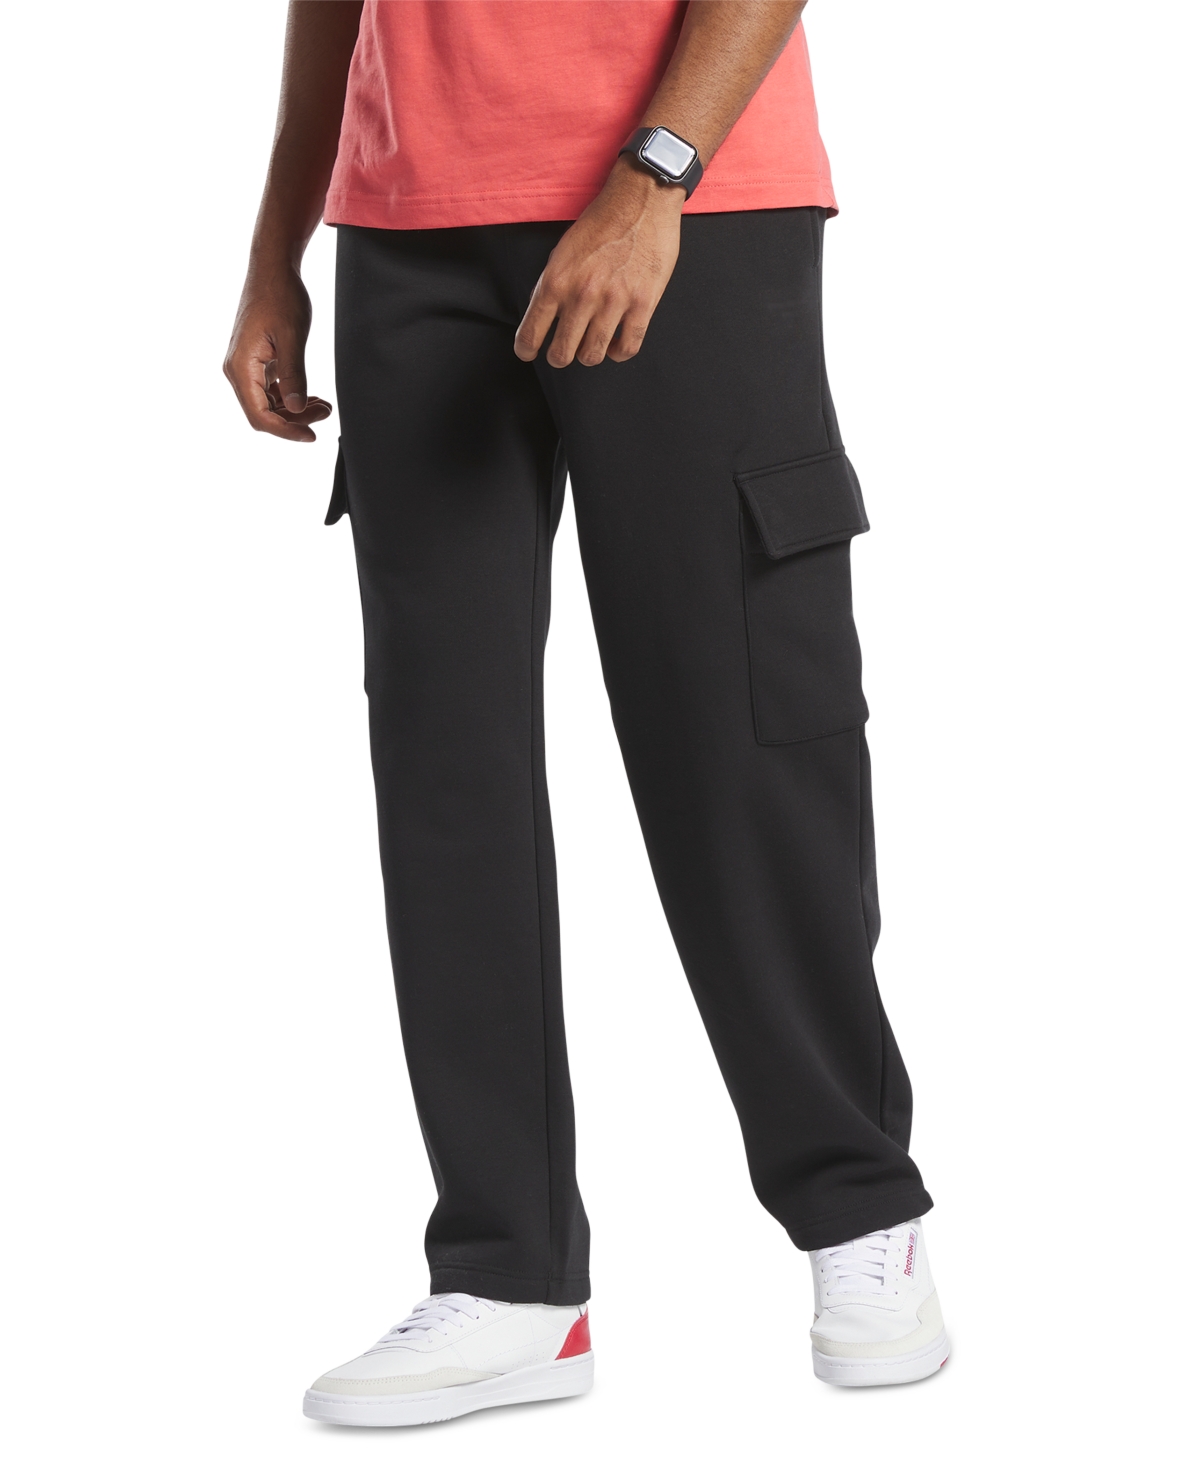 Reebok Women's Pull-On Drawstring Tricot Pants, A Macy's Exclusive